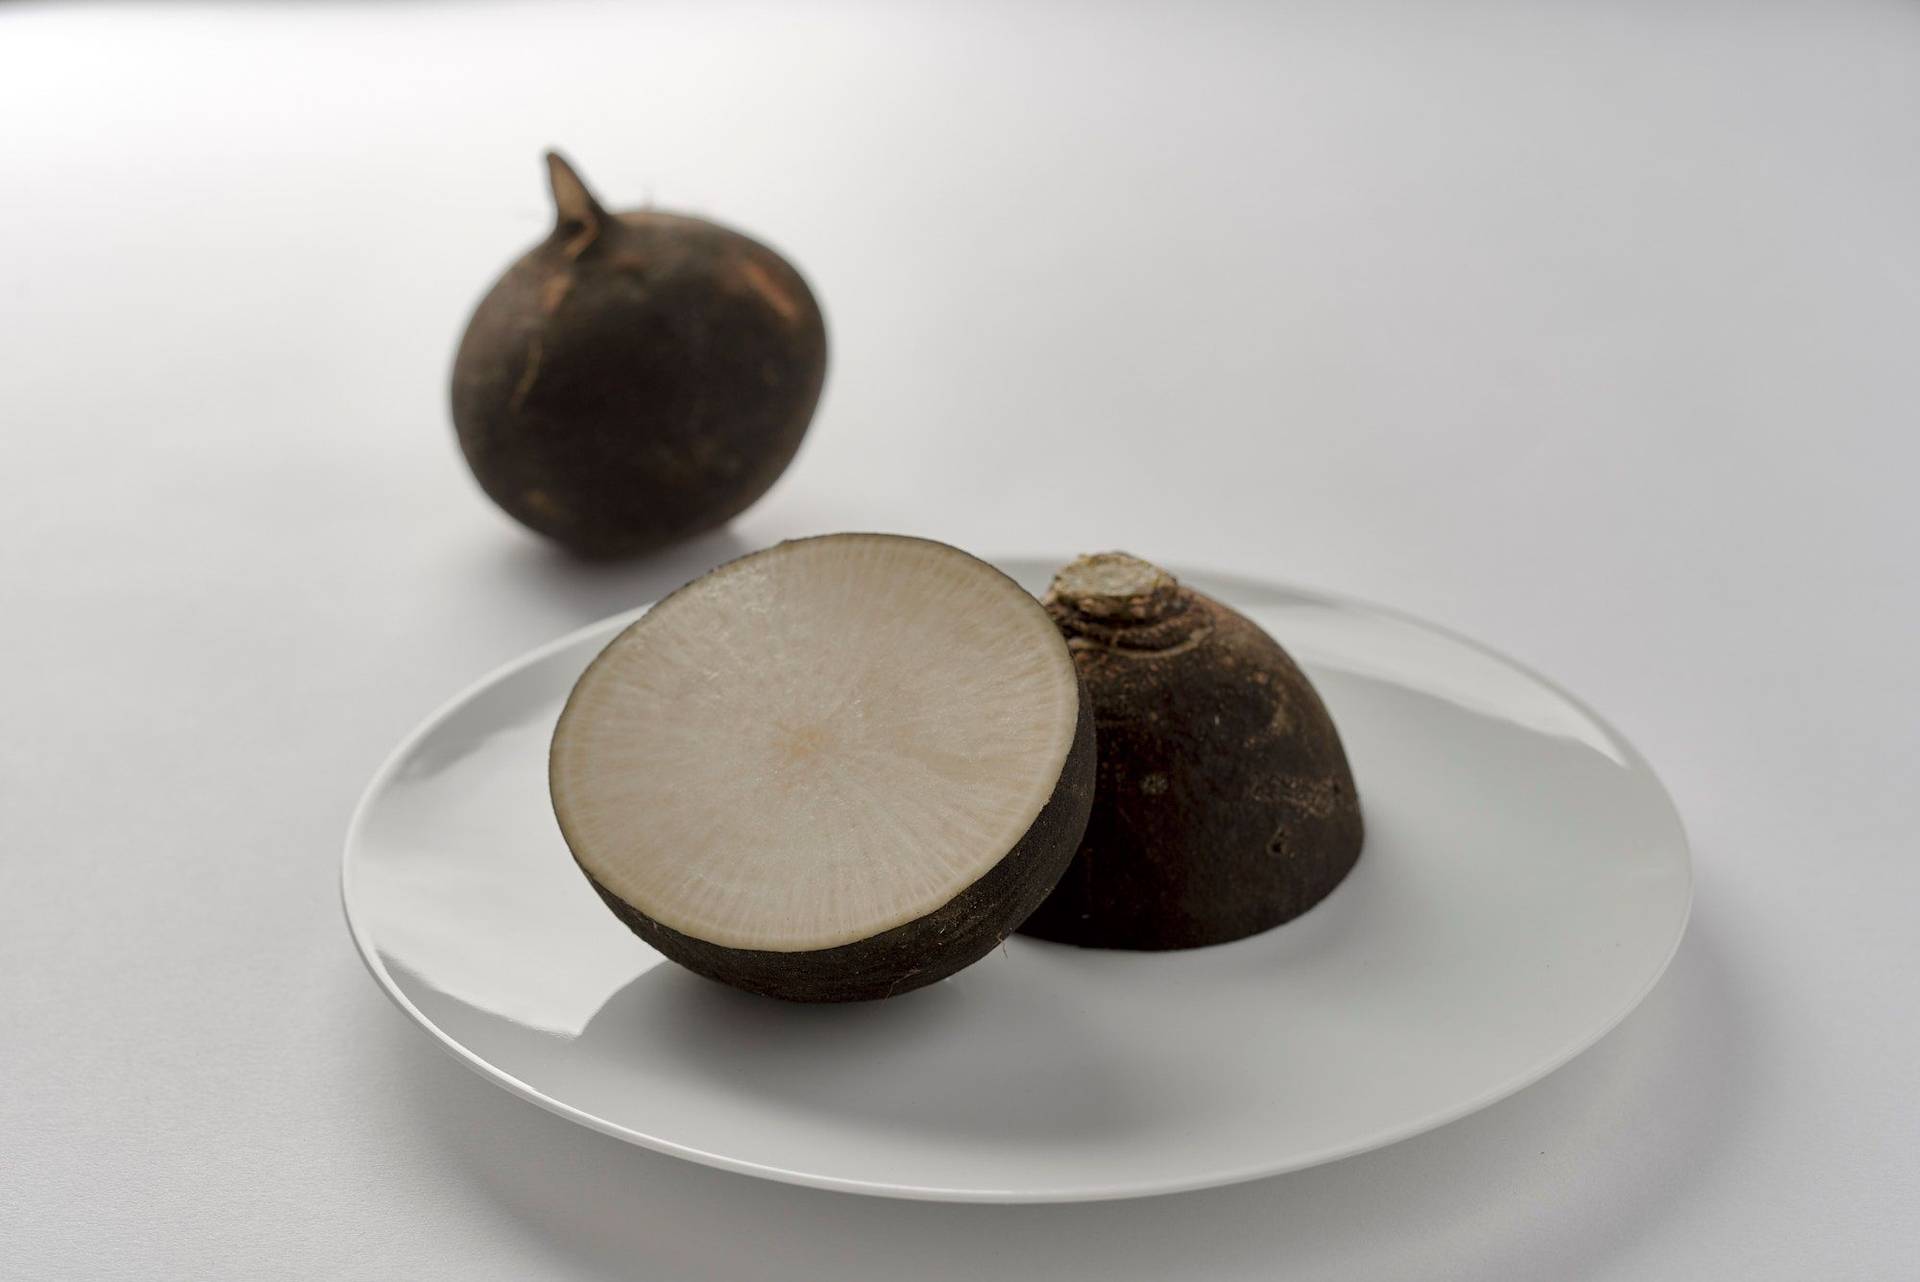 black radish on a white plate with white background